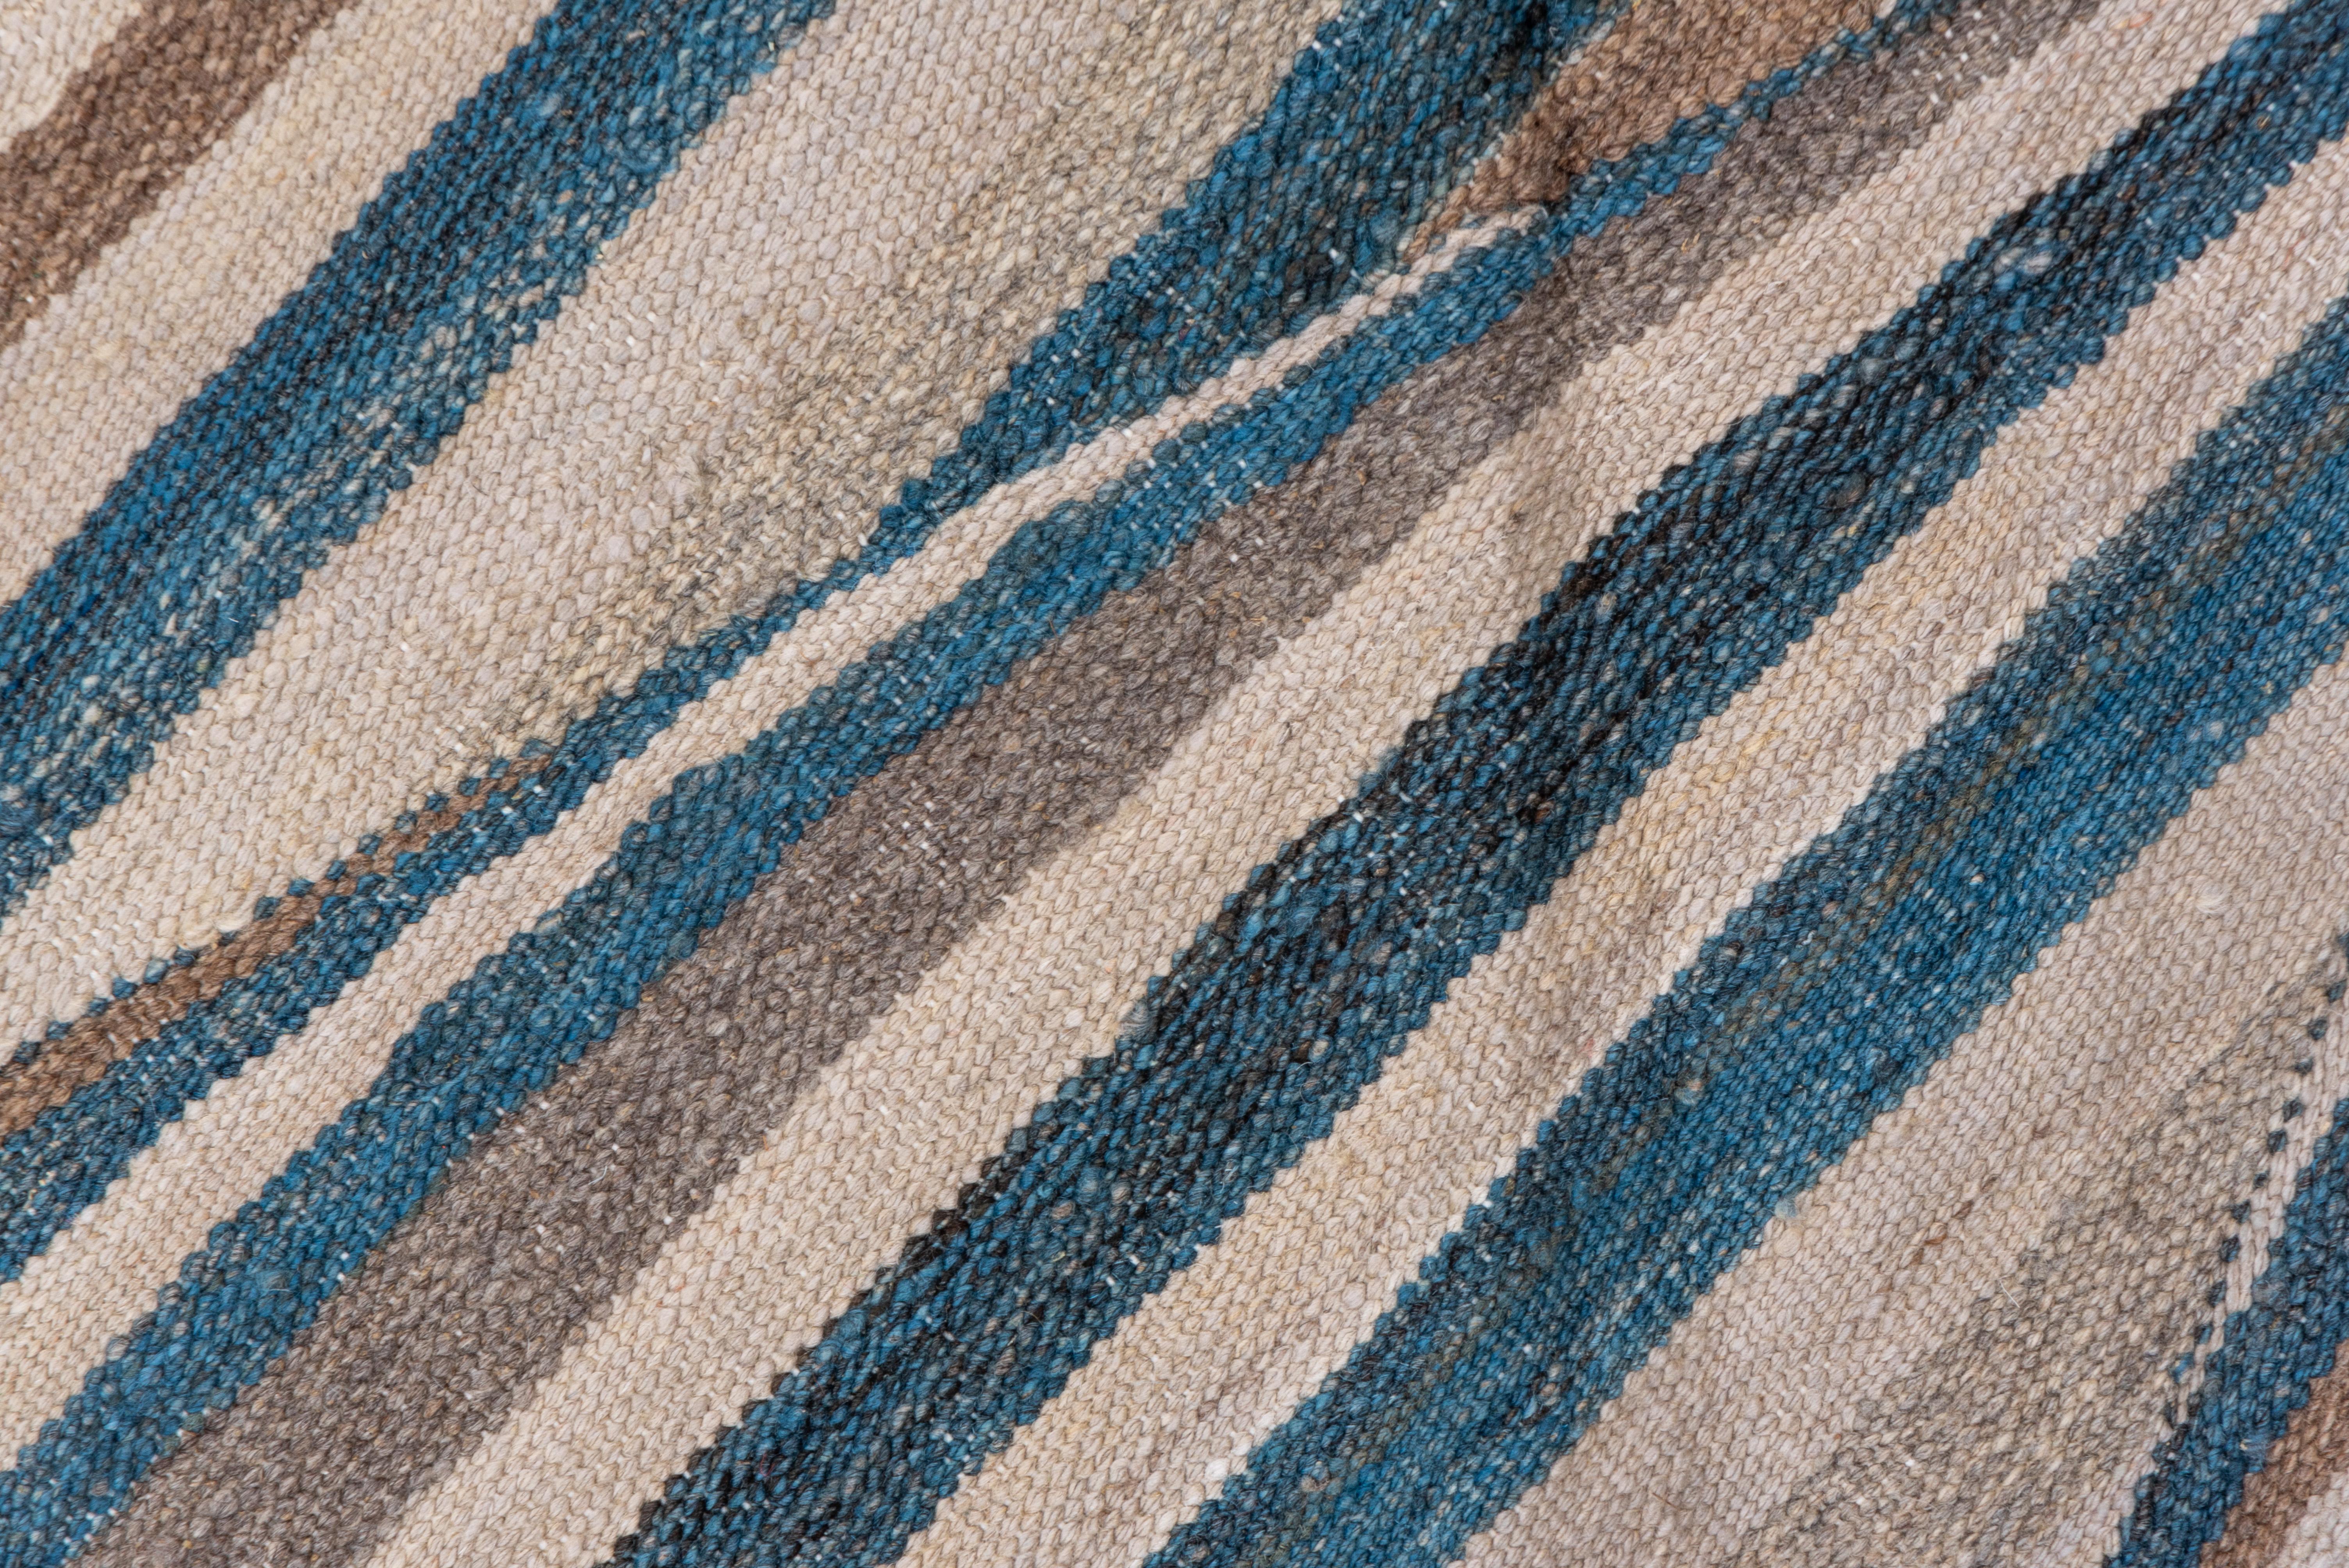 Finely Woven Modern Afghan Flatweave Rug, Taupe, Blue & Brown Palette In Excellent Condition For Sale In New York, NY